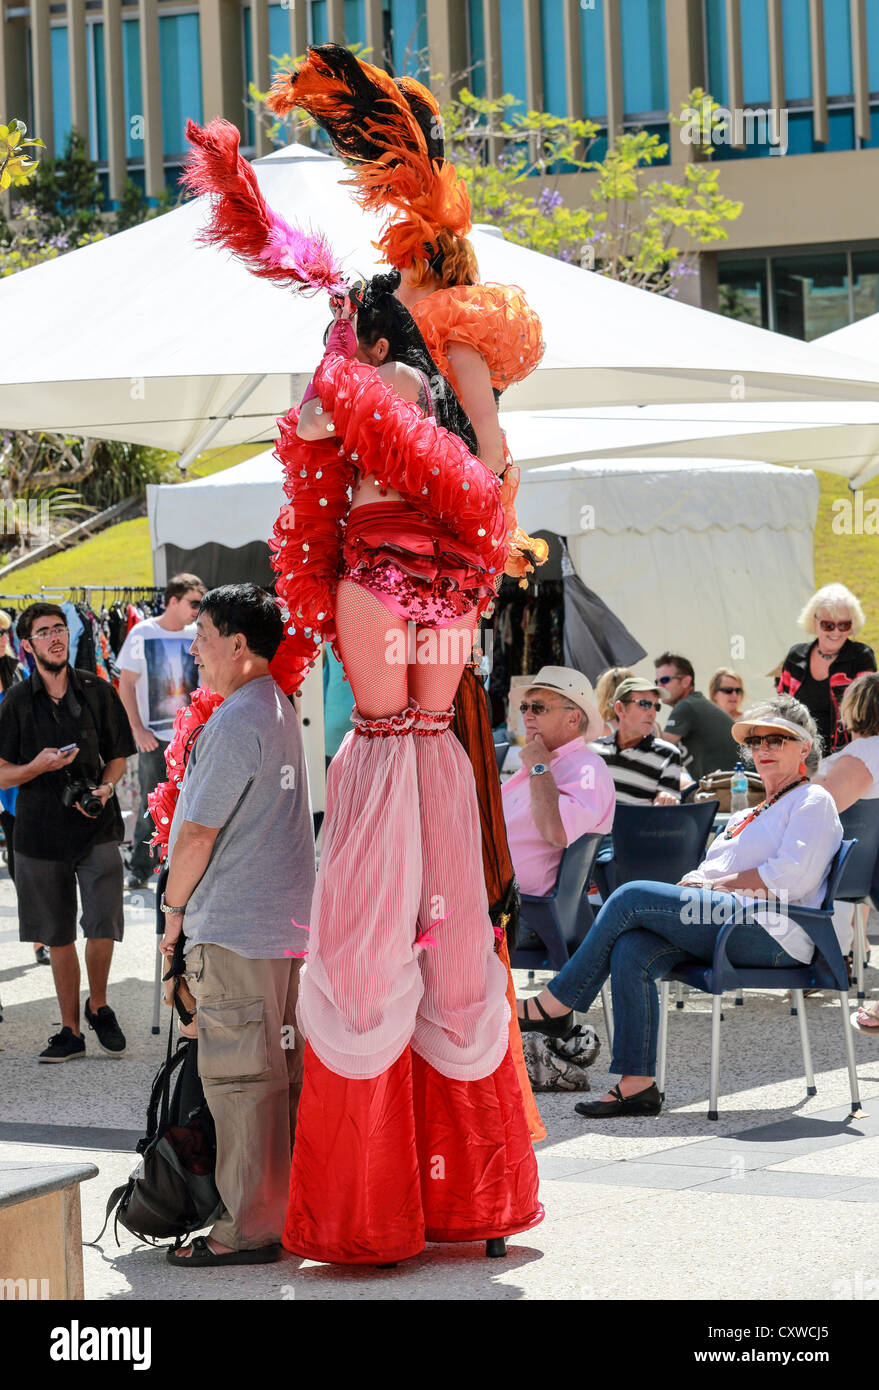 Street performers on stilts and makeup at creative festival Stock Photo